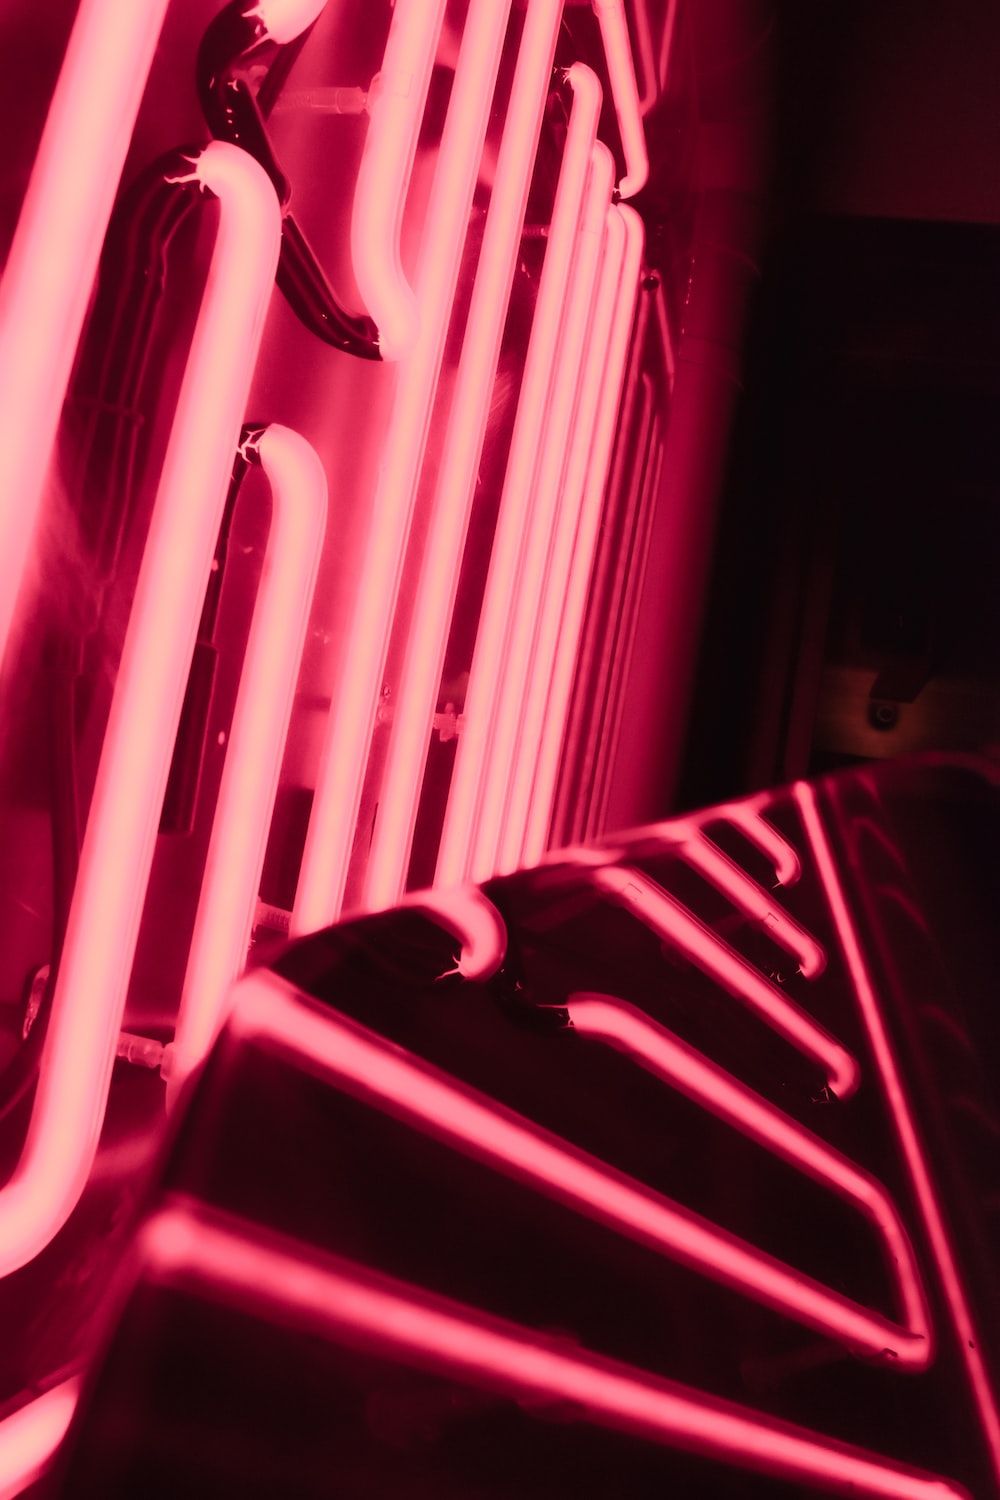 A neon sign with a pink glow. - Hot pink, neon pink, neon